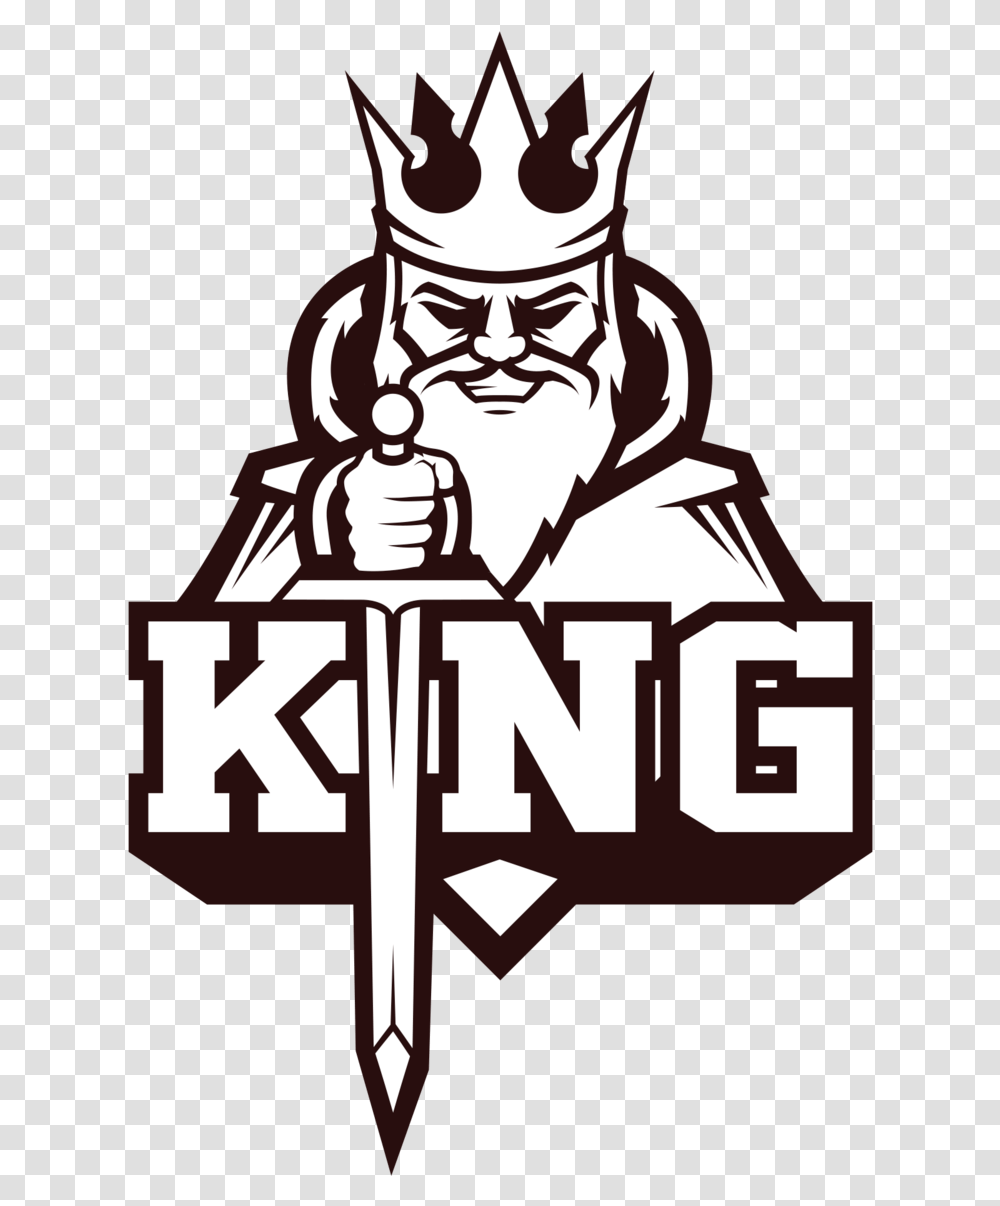 Logo Team King Image Youtube Logos For Channel, Crowd, Face, Cross, Symbol Transparent Png